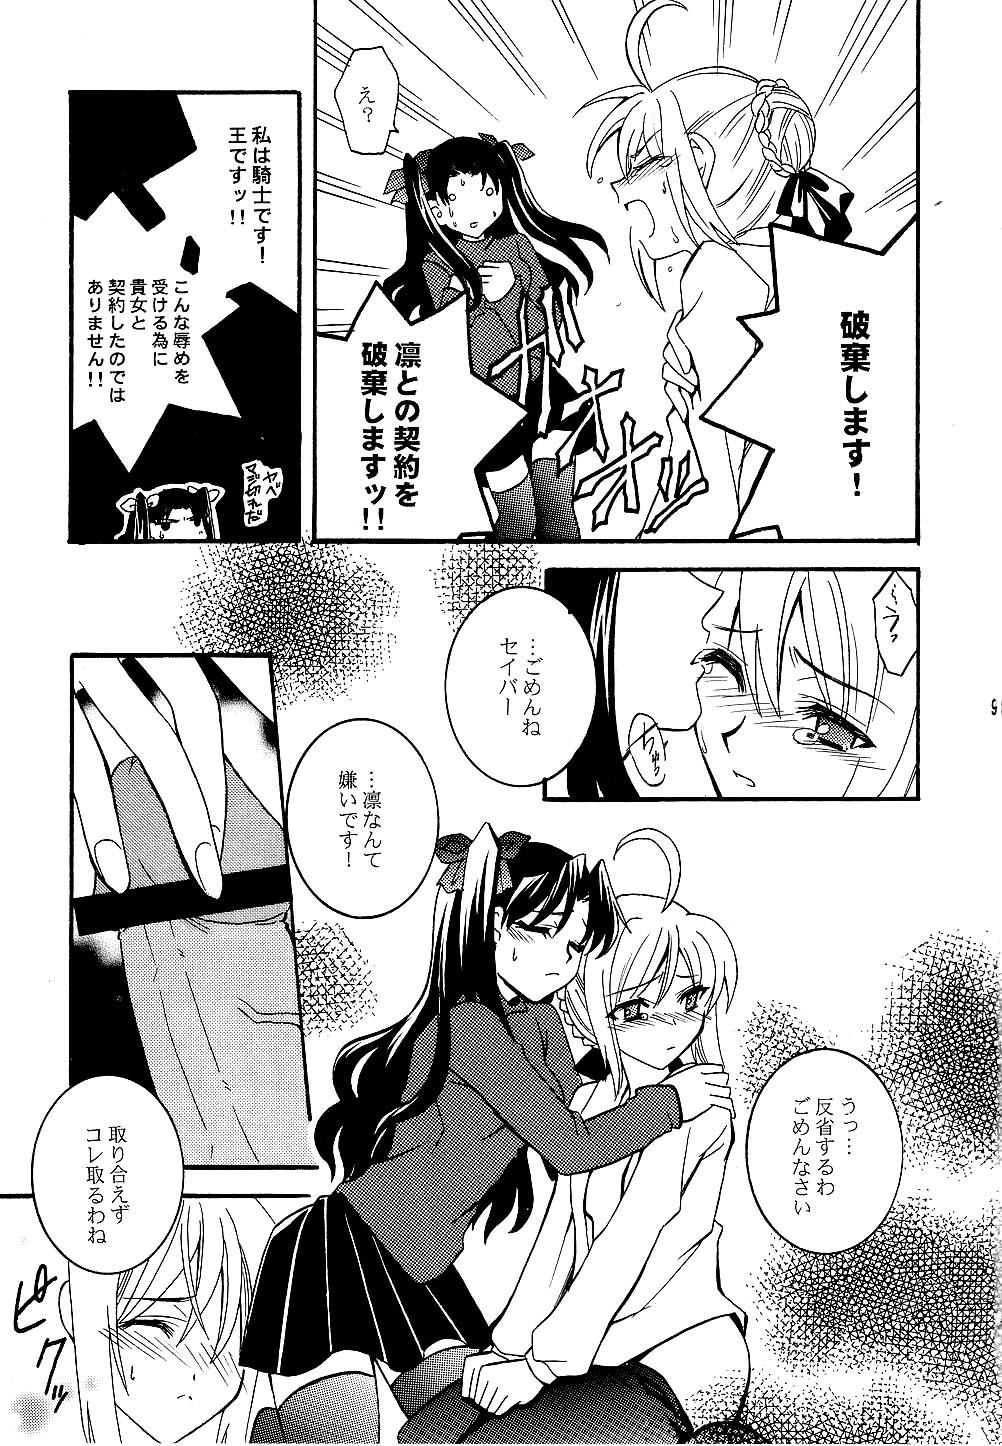 Ass To Mouth KING KILL 33 - Fate stay night Gay Blondhair - Page 8